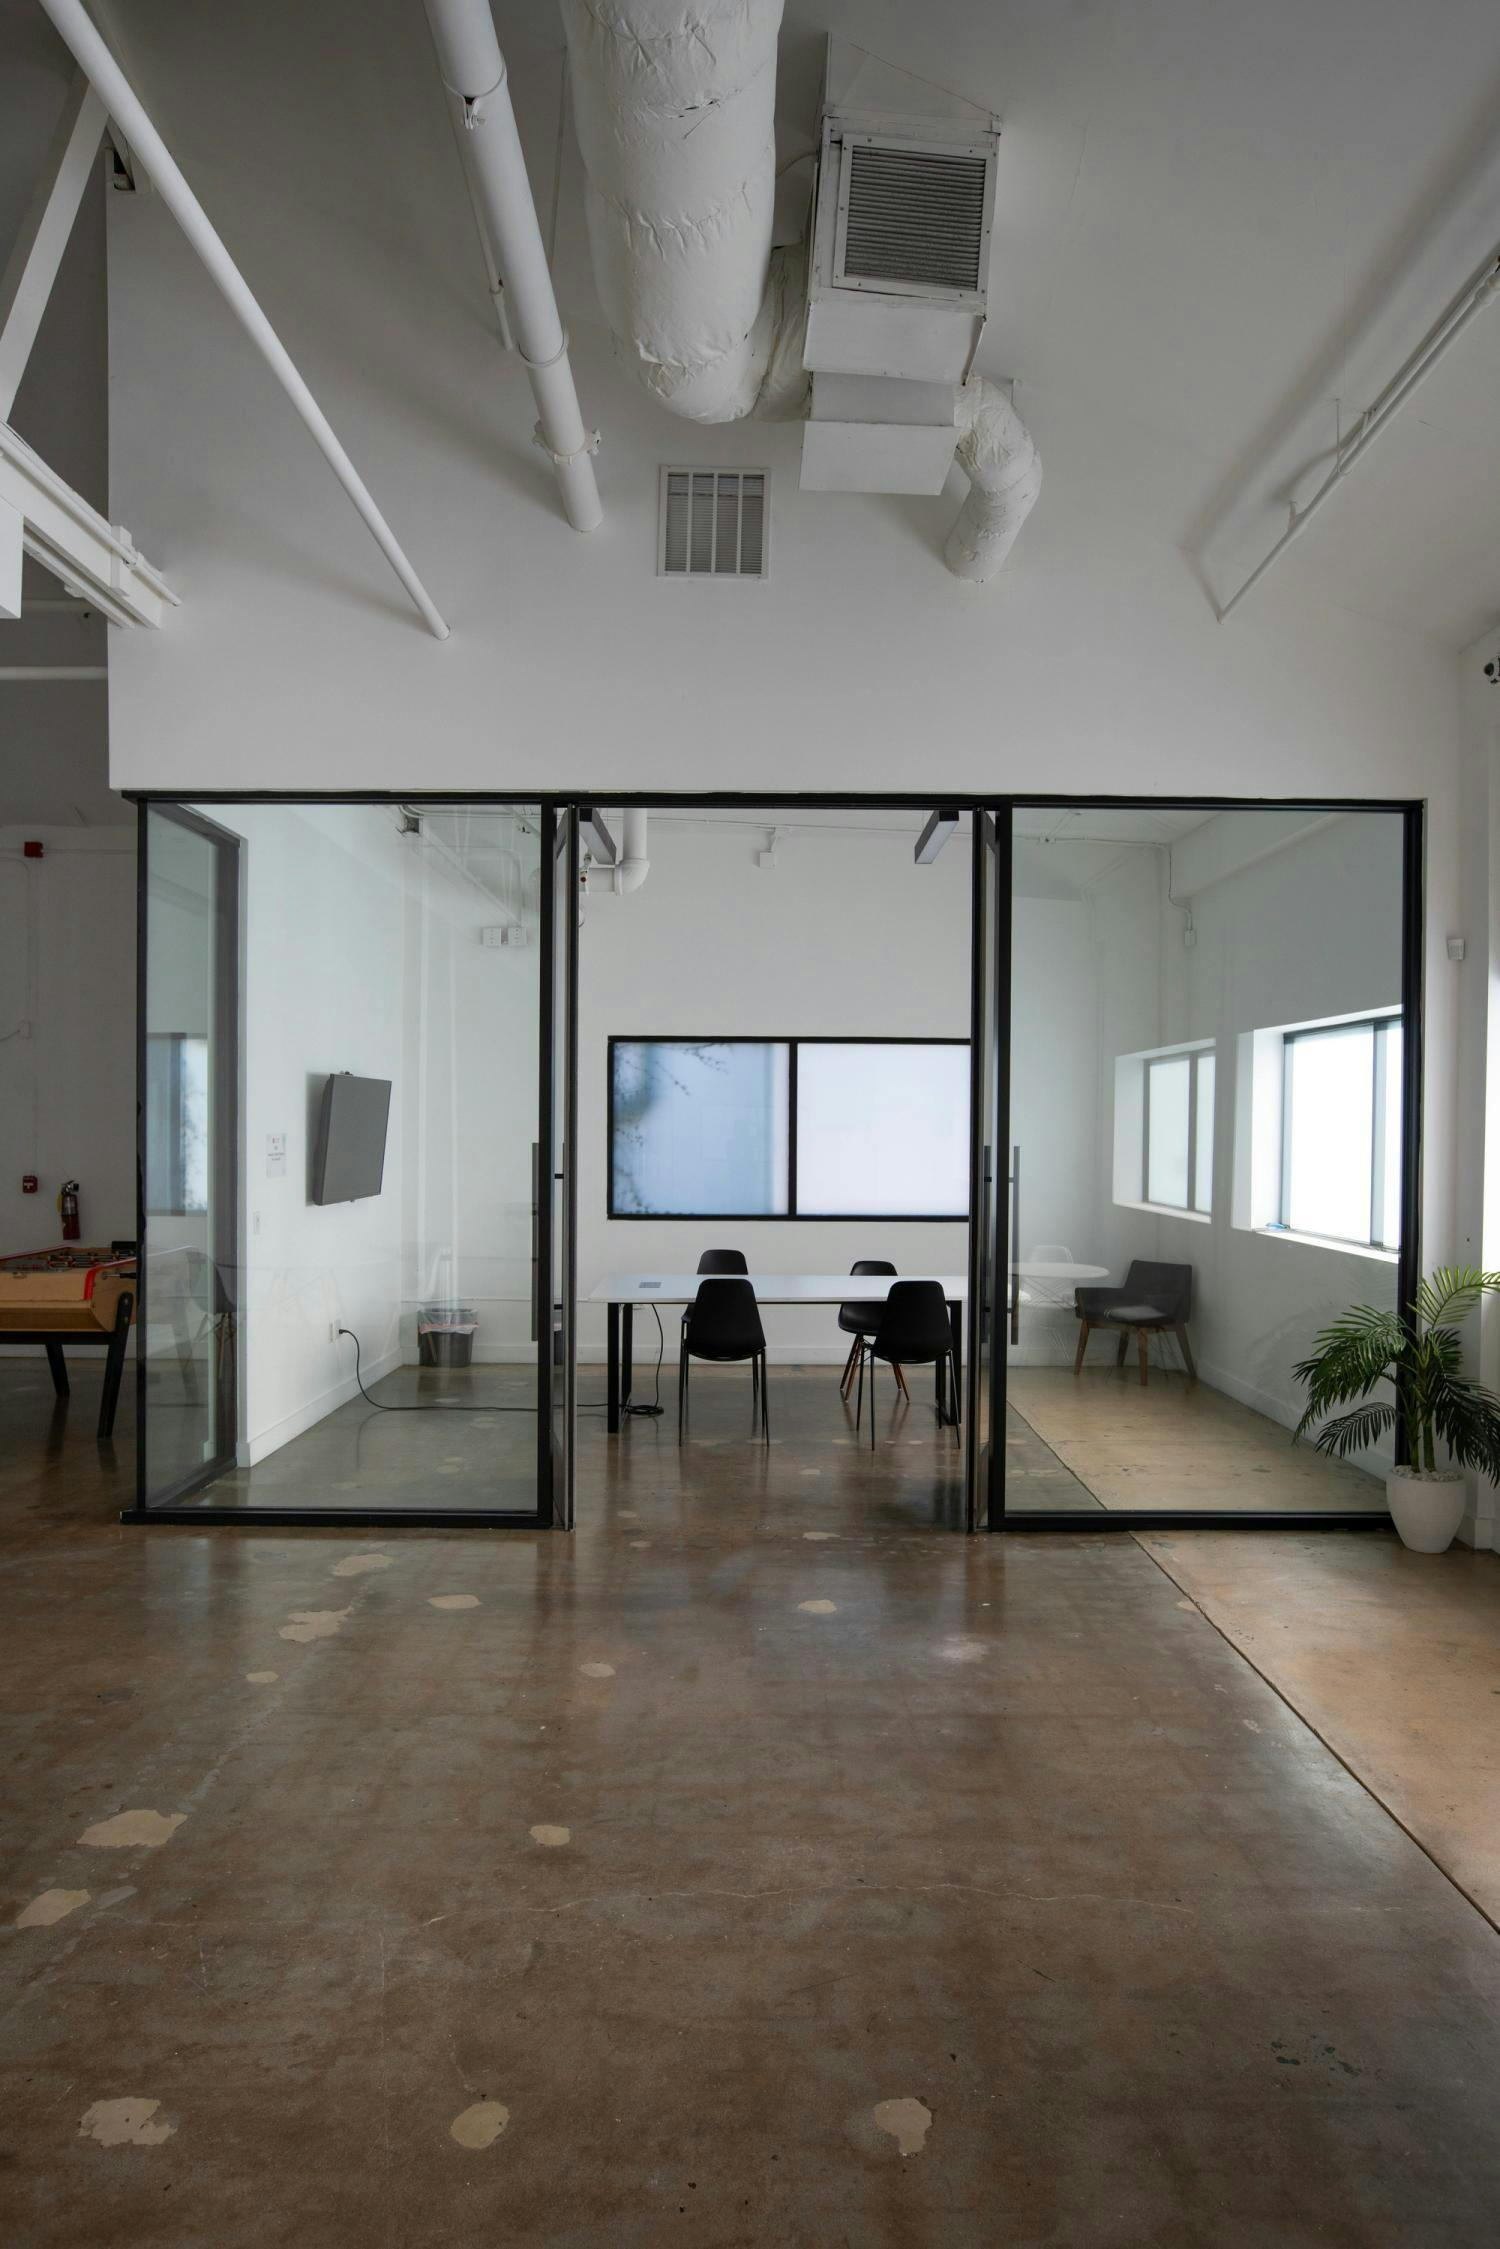 A shot of a modern studio space with glass partitions, a conference area in the view, and an urban industrial ceiling with exposed pipes and ductwork.